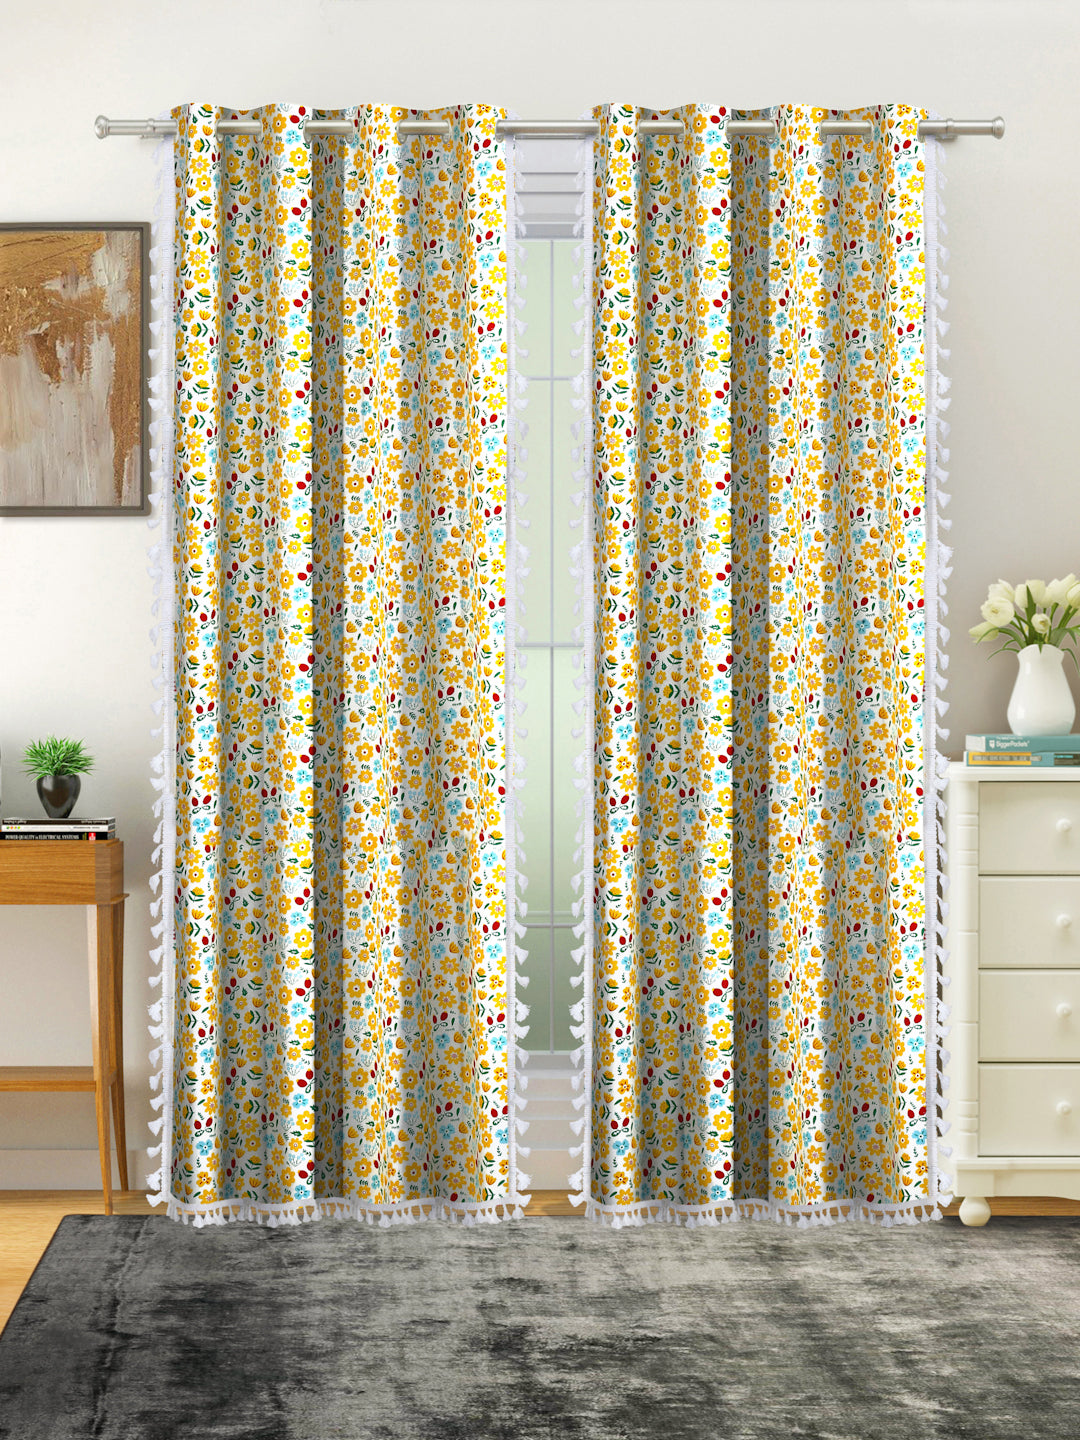 Cotton Printed Boho Light Filtering Long Door Curtain with Lace- Yellow (Pack of 2)